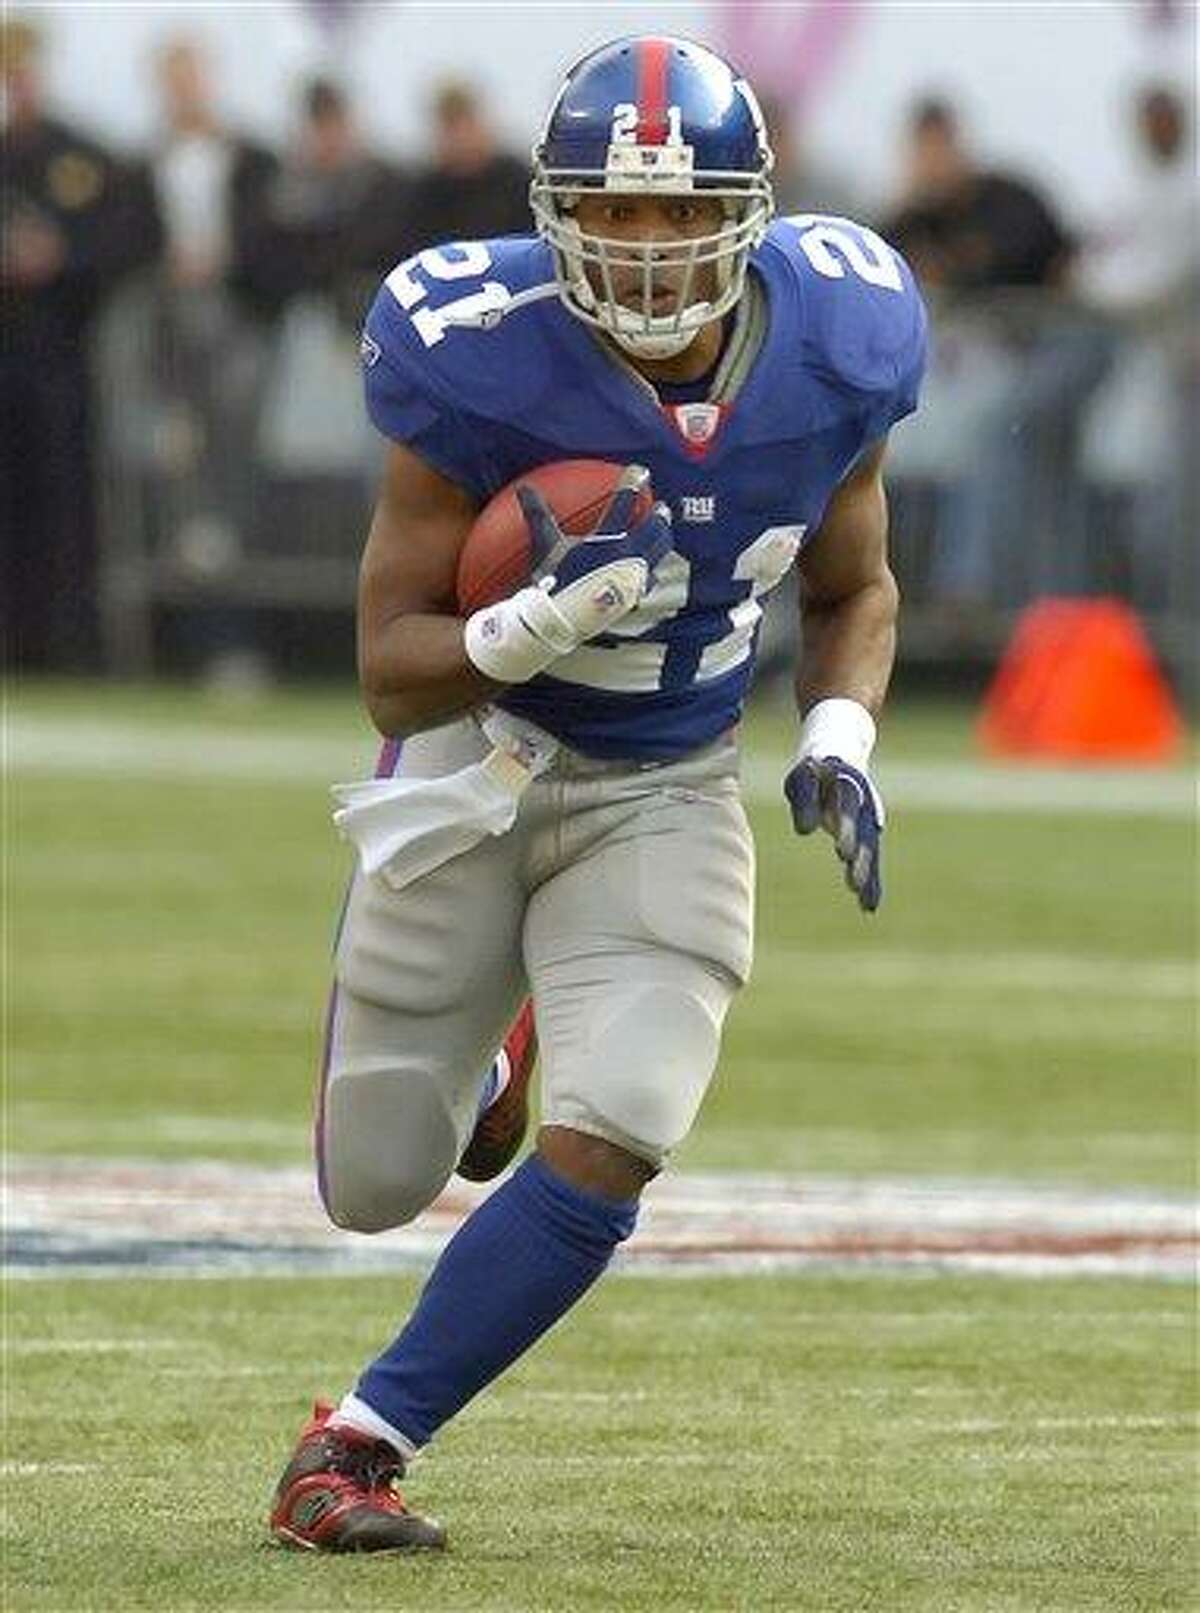 In this Nov. 5, 2006, photo, New York Giants running back Tiki Barber runs for a 13-yard gain during an NFL football against the Houston Texans in East Rutherford, N.J. Barber insists his attempt to return to the NFL after four years in retirement is not about money. The 36-year-old surprisingly retired in 2006 to pursue a broadcasting career. Then, just as surprisingly, he decided to give the NFL another shot. He asked the team to take him off the reserve-retirement list in March. The Giants said they will release him once the league allows it. Teams have not been allowed to make roster moves because of the labor fight. (AP Photo/Bill Kostroun)